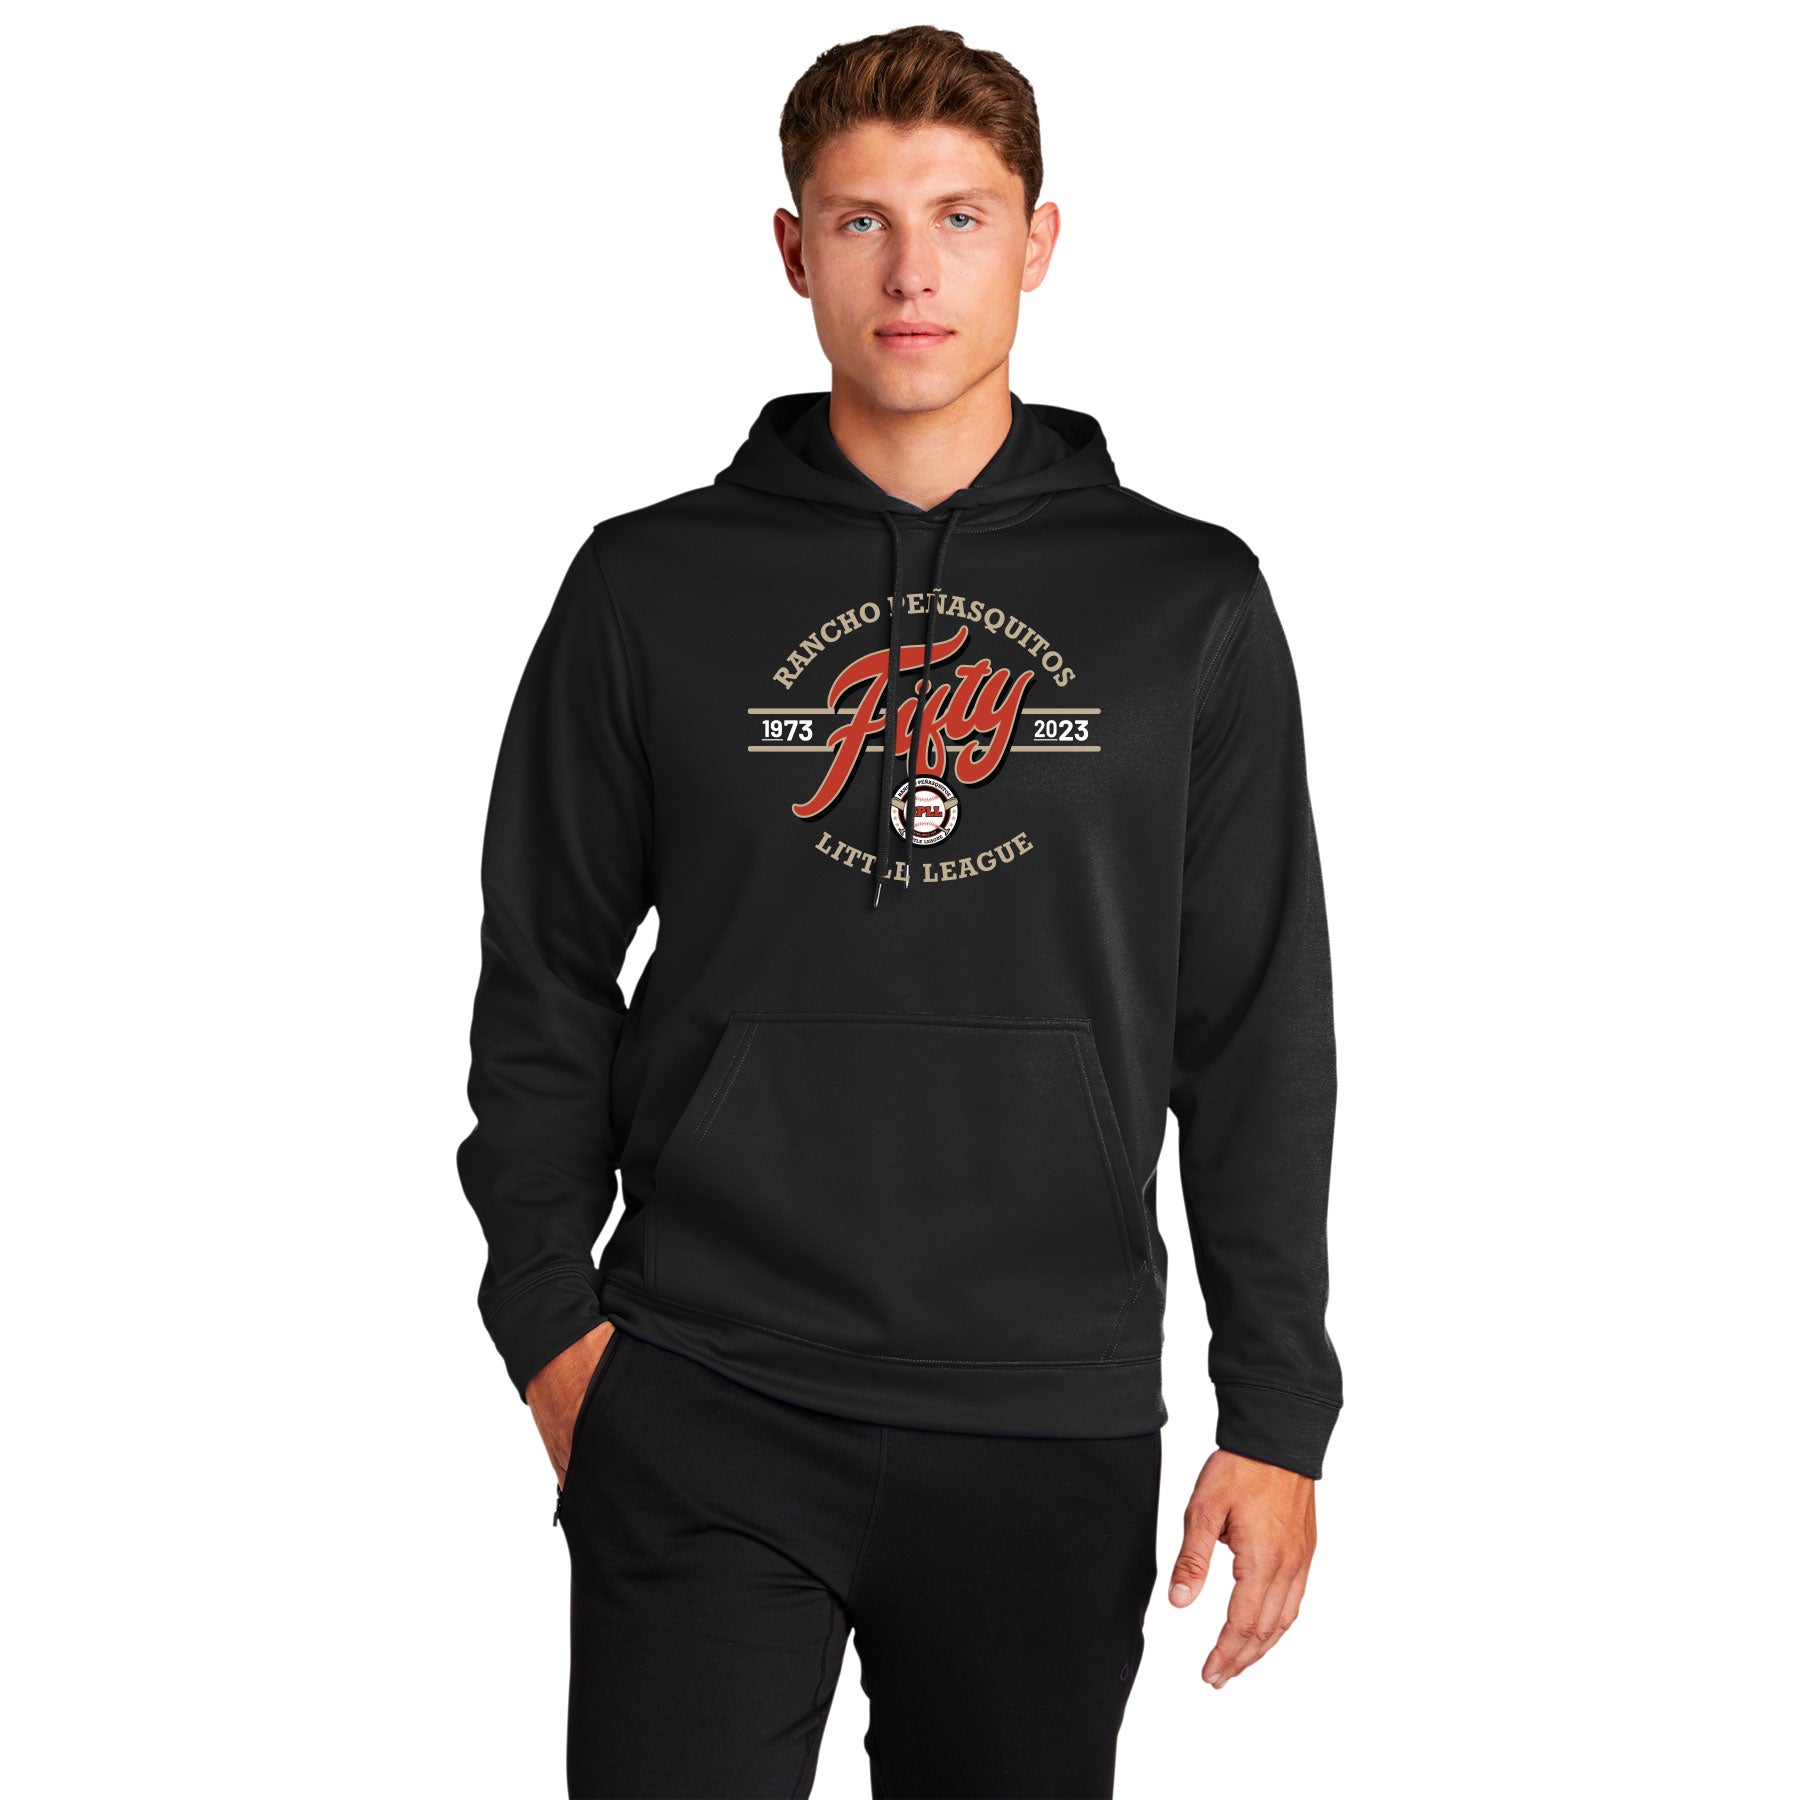 RPLL FIFTY SCRIPT ADULT & YOUTH WICKING FLEECE HOODED PULLOVER